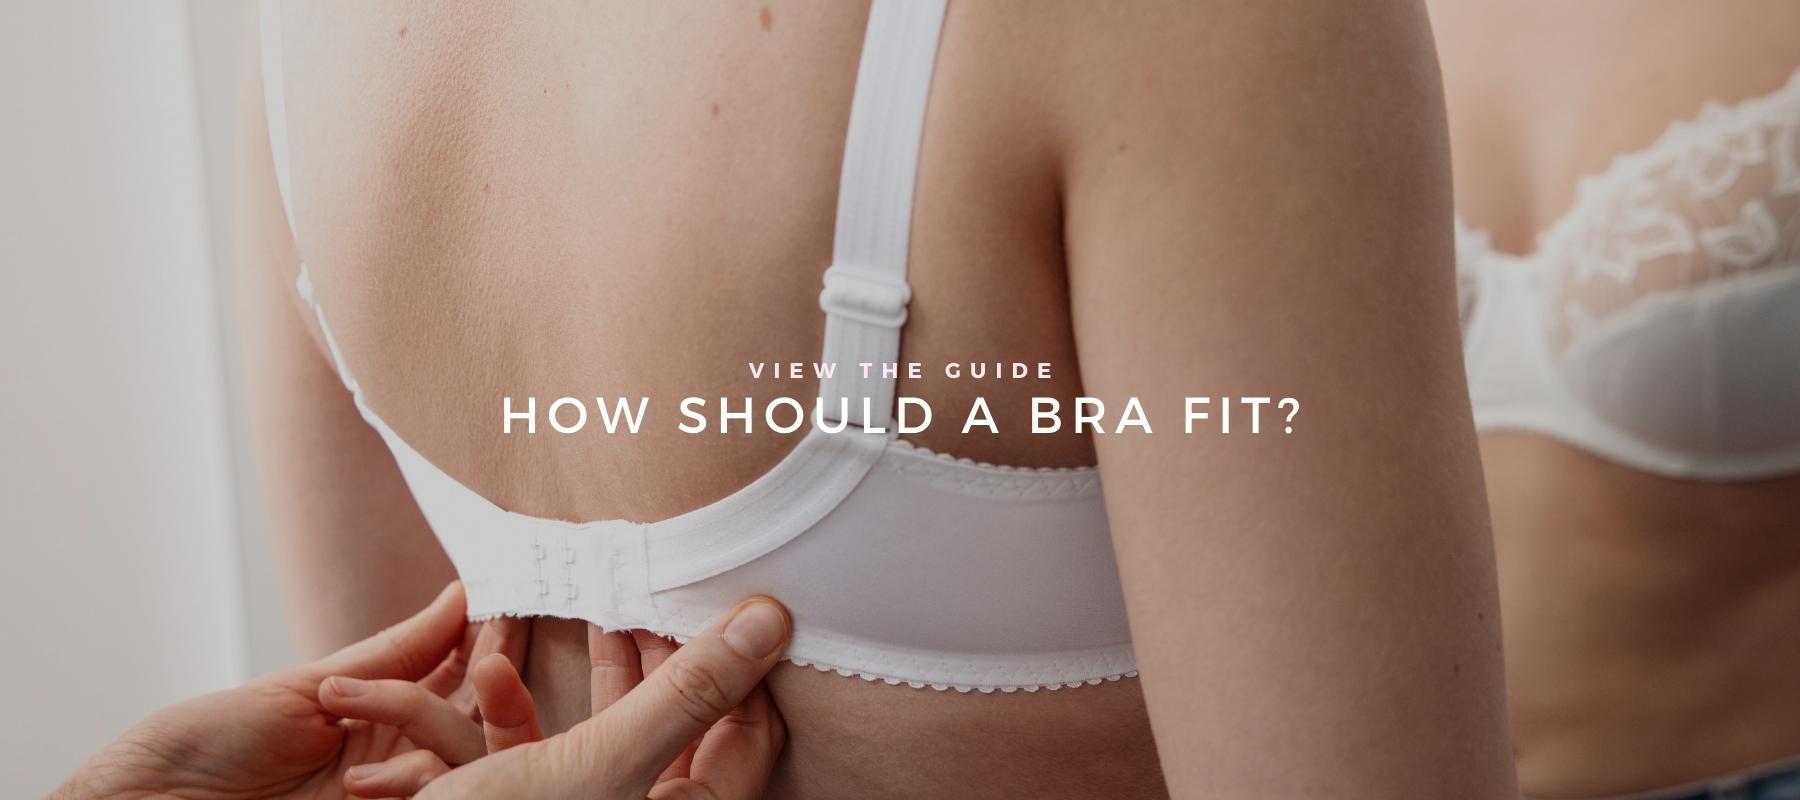 Bra Fitting and Guides, Bra Size